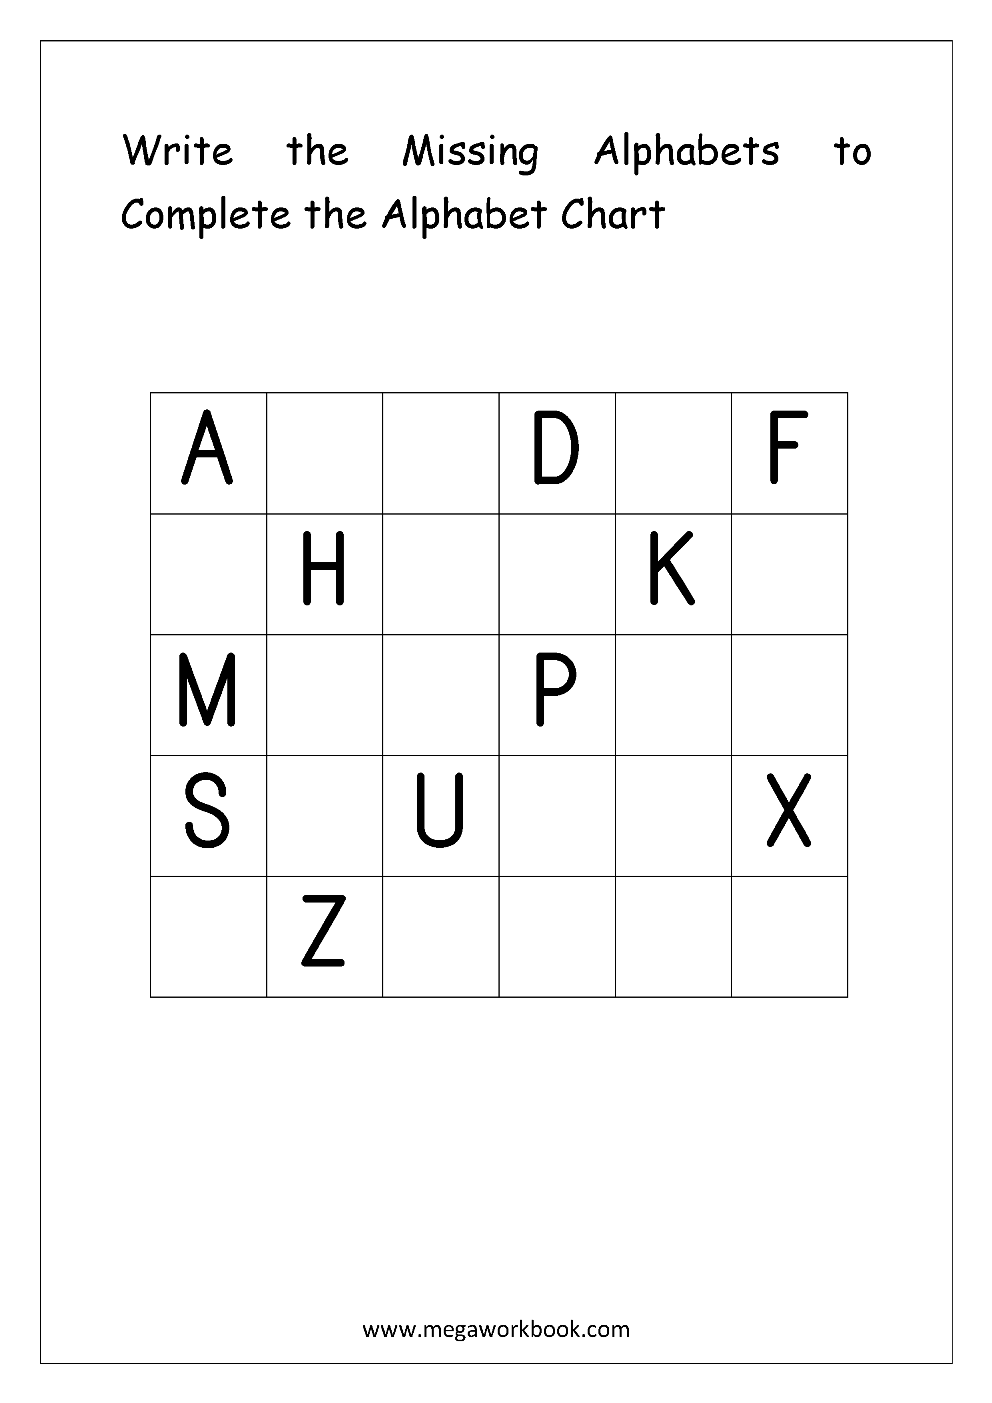 Free English Worksheets - Alphabetical Sequence with regard to Alphabet Sequencing Worksheets